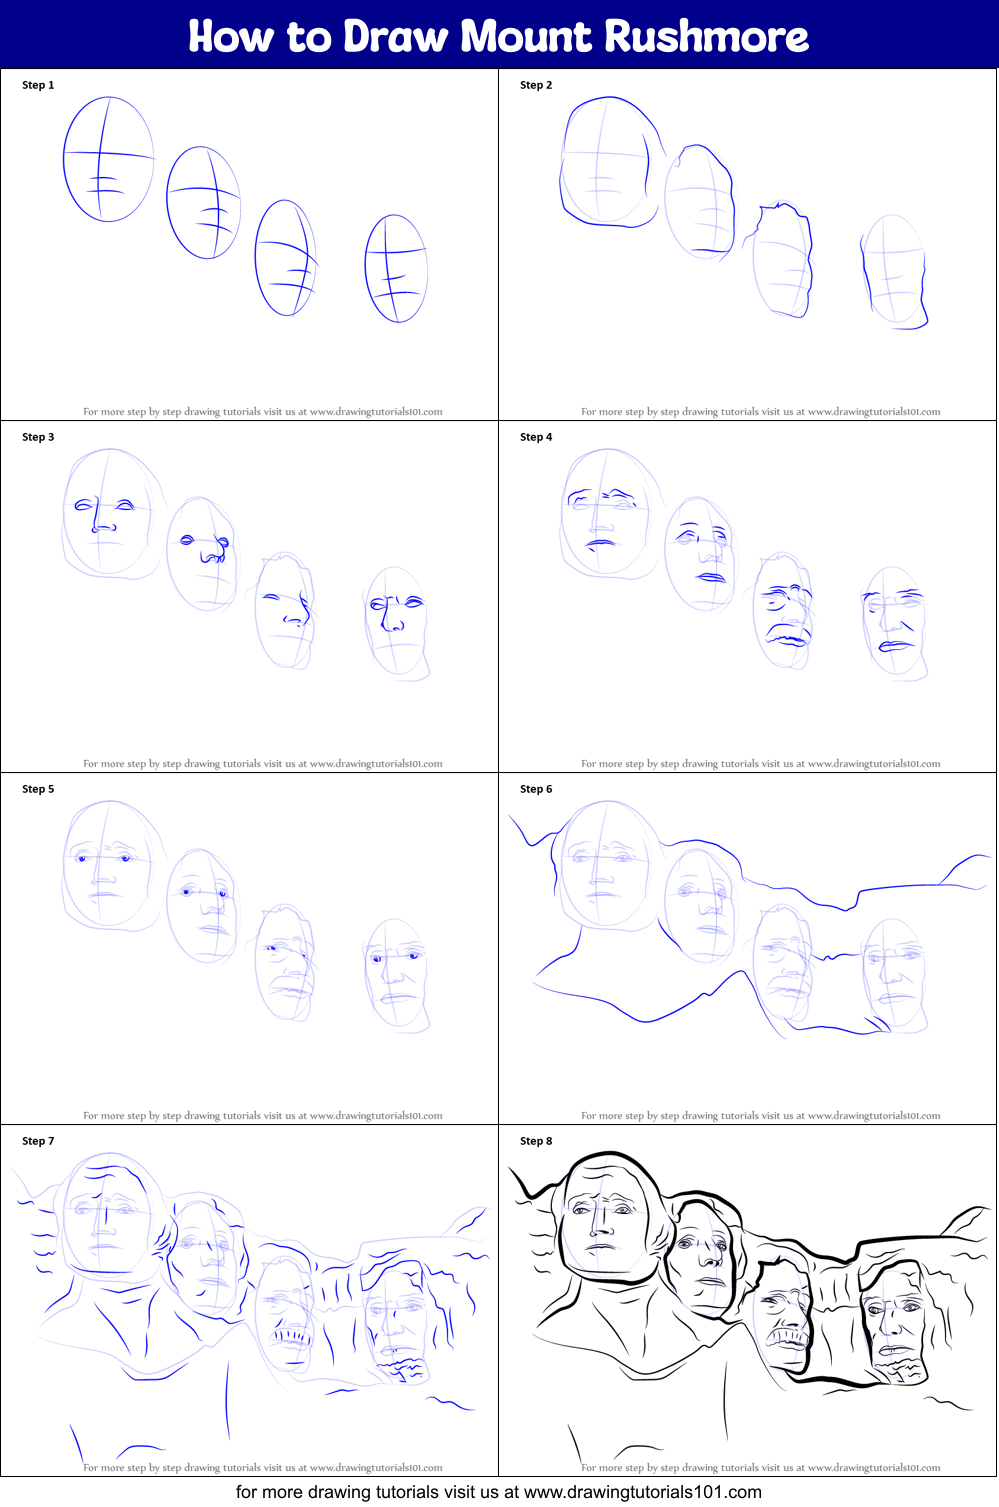 How to Draw Mount Rushmore printable step by step drawing sheet